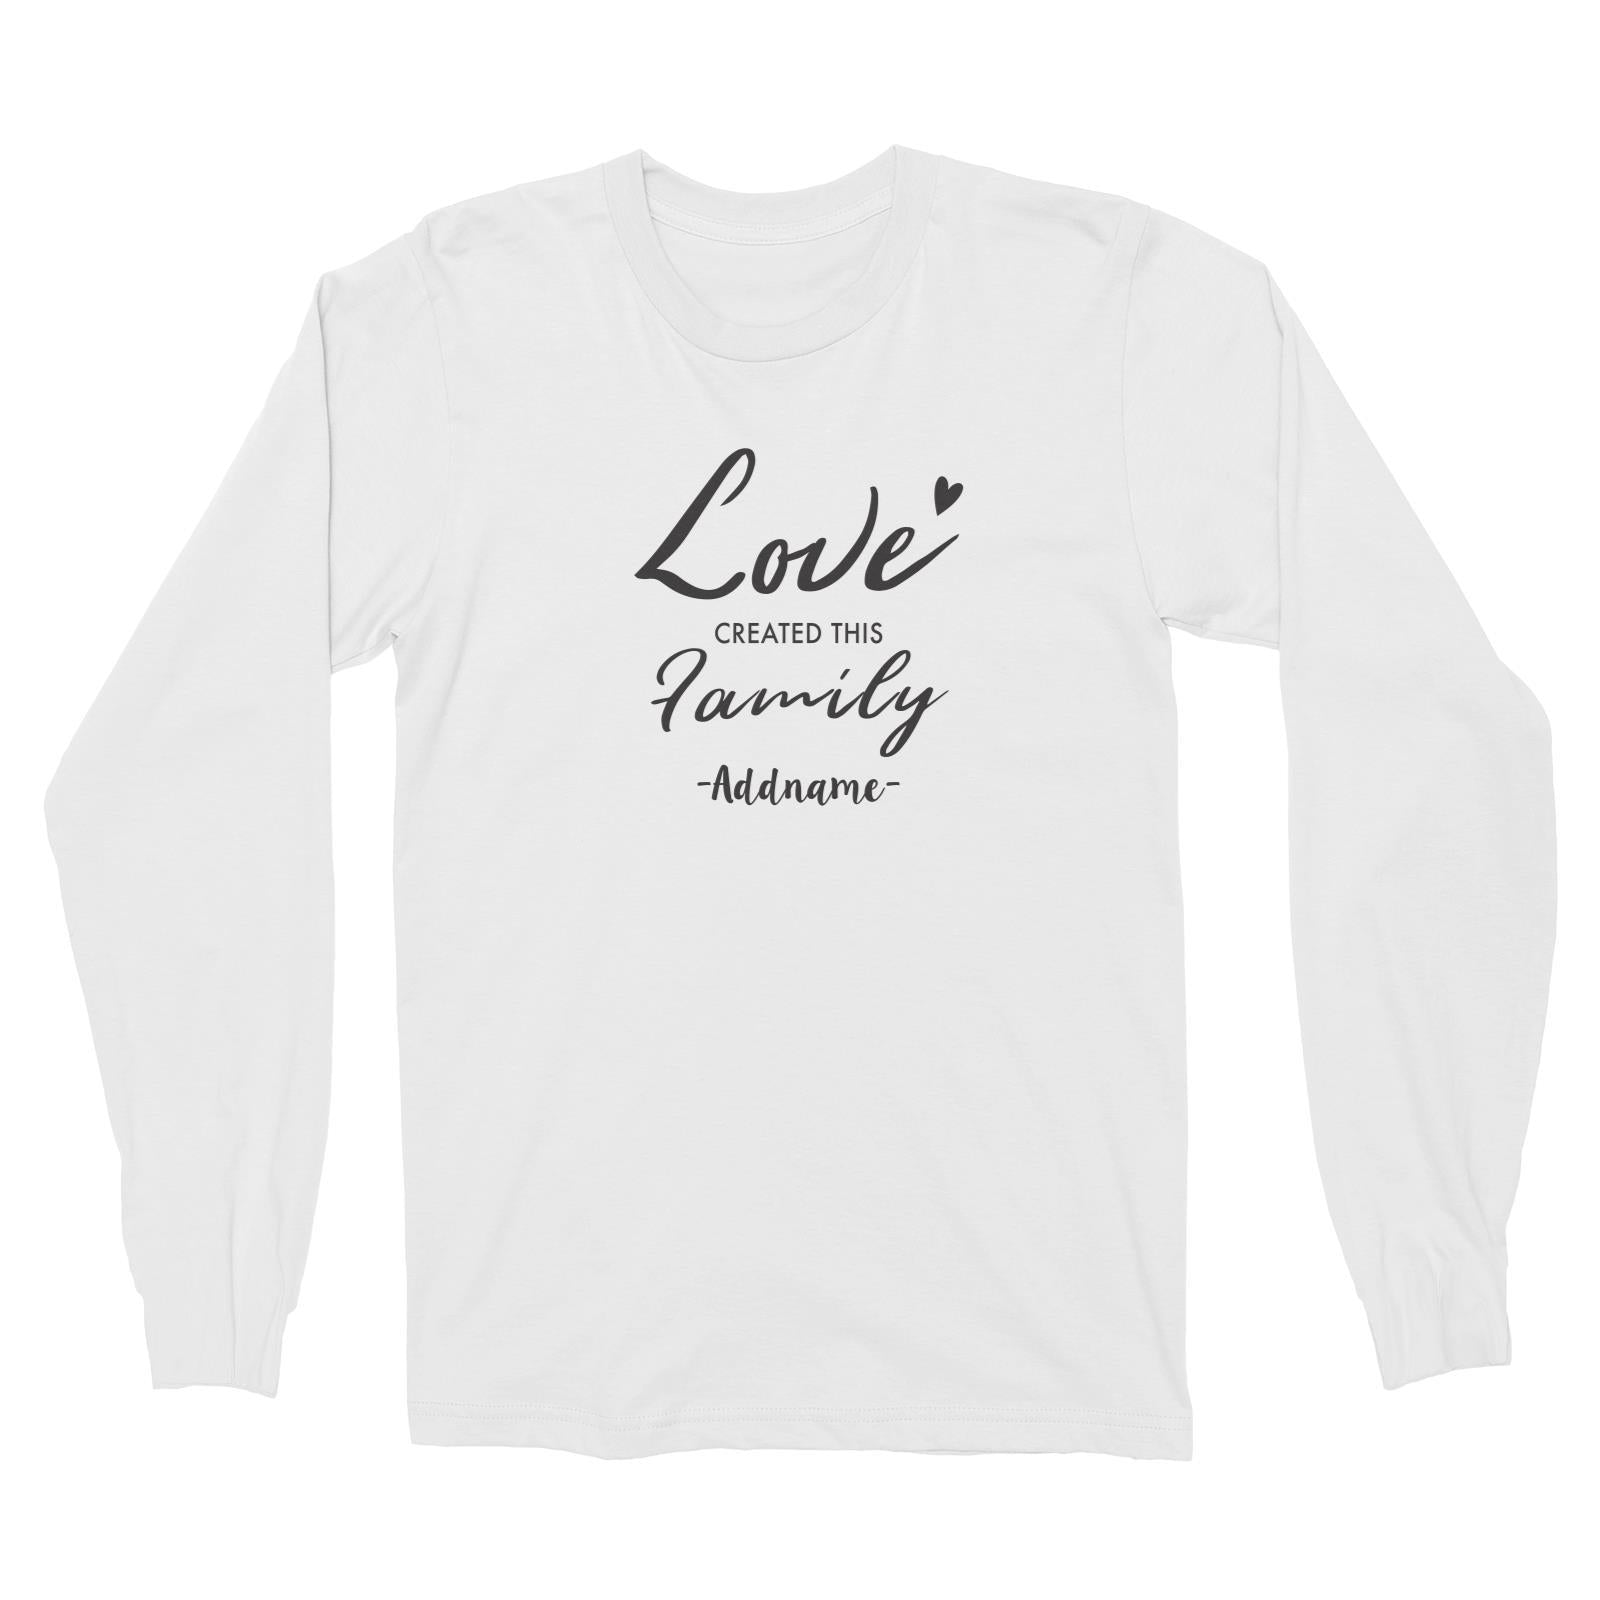 Love Created This Family Addname Long Sleeve Unisex T-Shirt  Matching Family Personalizable Designs